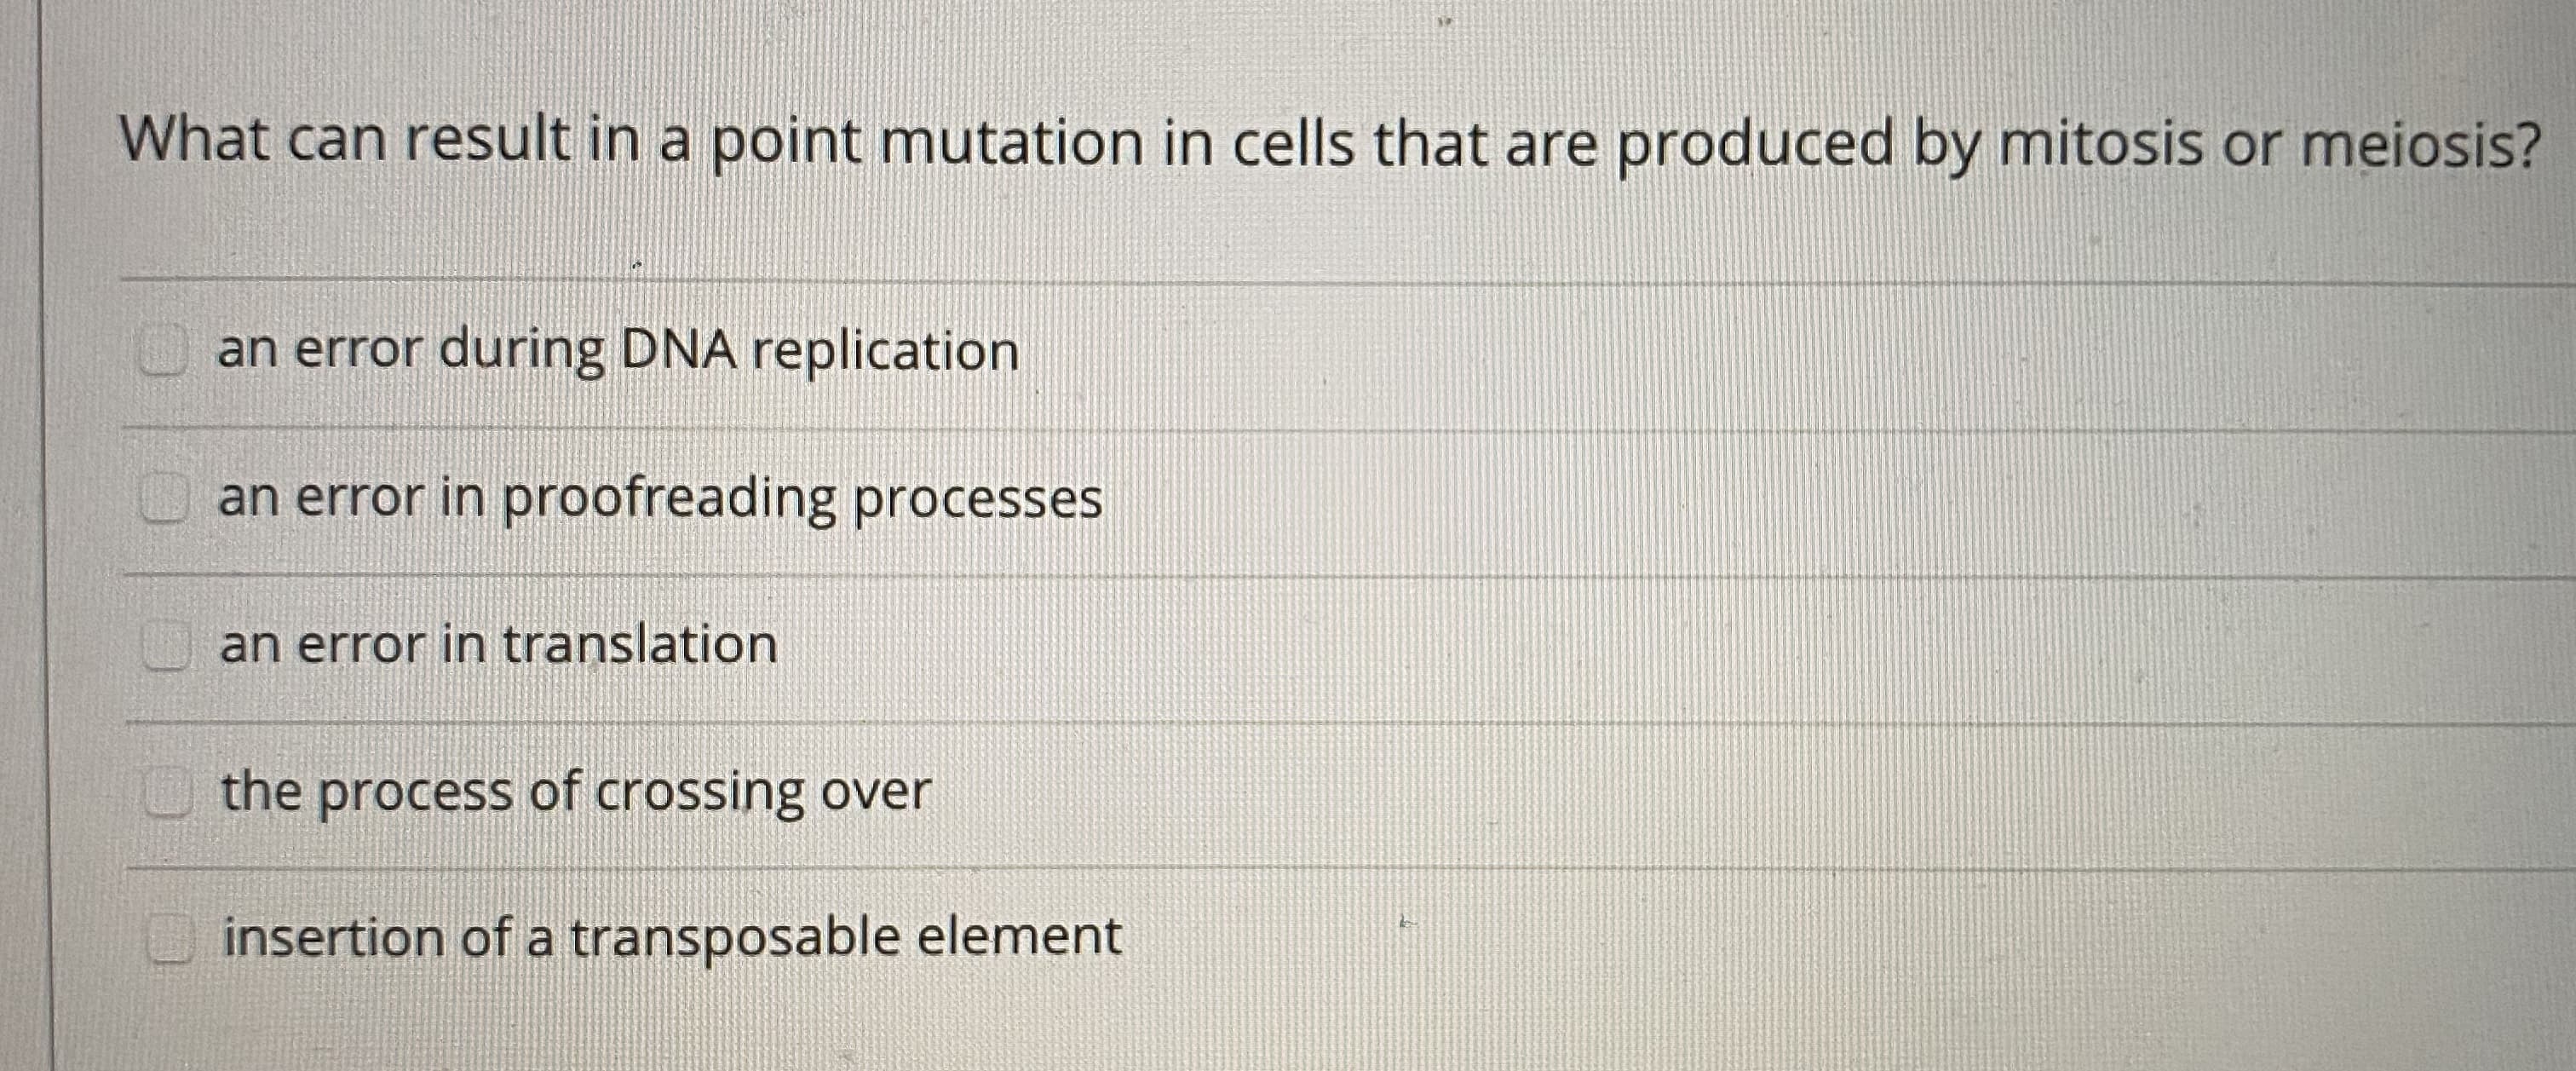 What can result in a point mutation in cells that are produced by mitosis or meiosis?
an error during DNA replication
an error in proofreading processes
an error in translation
